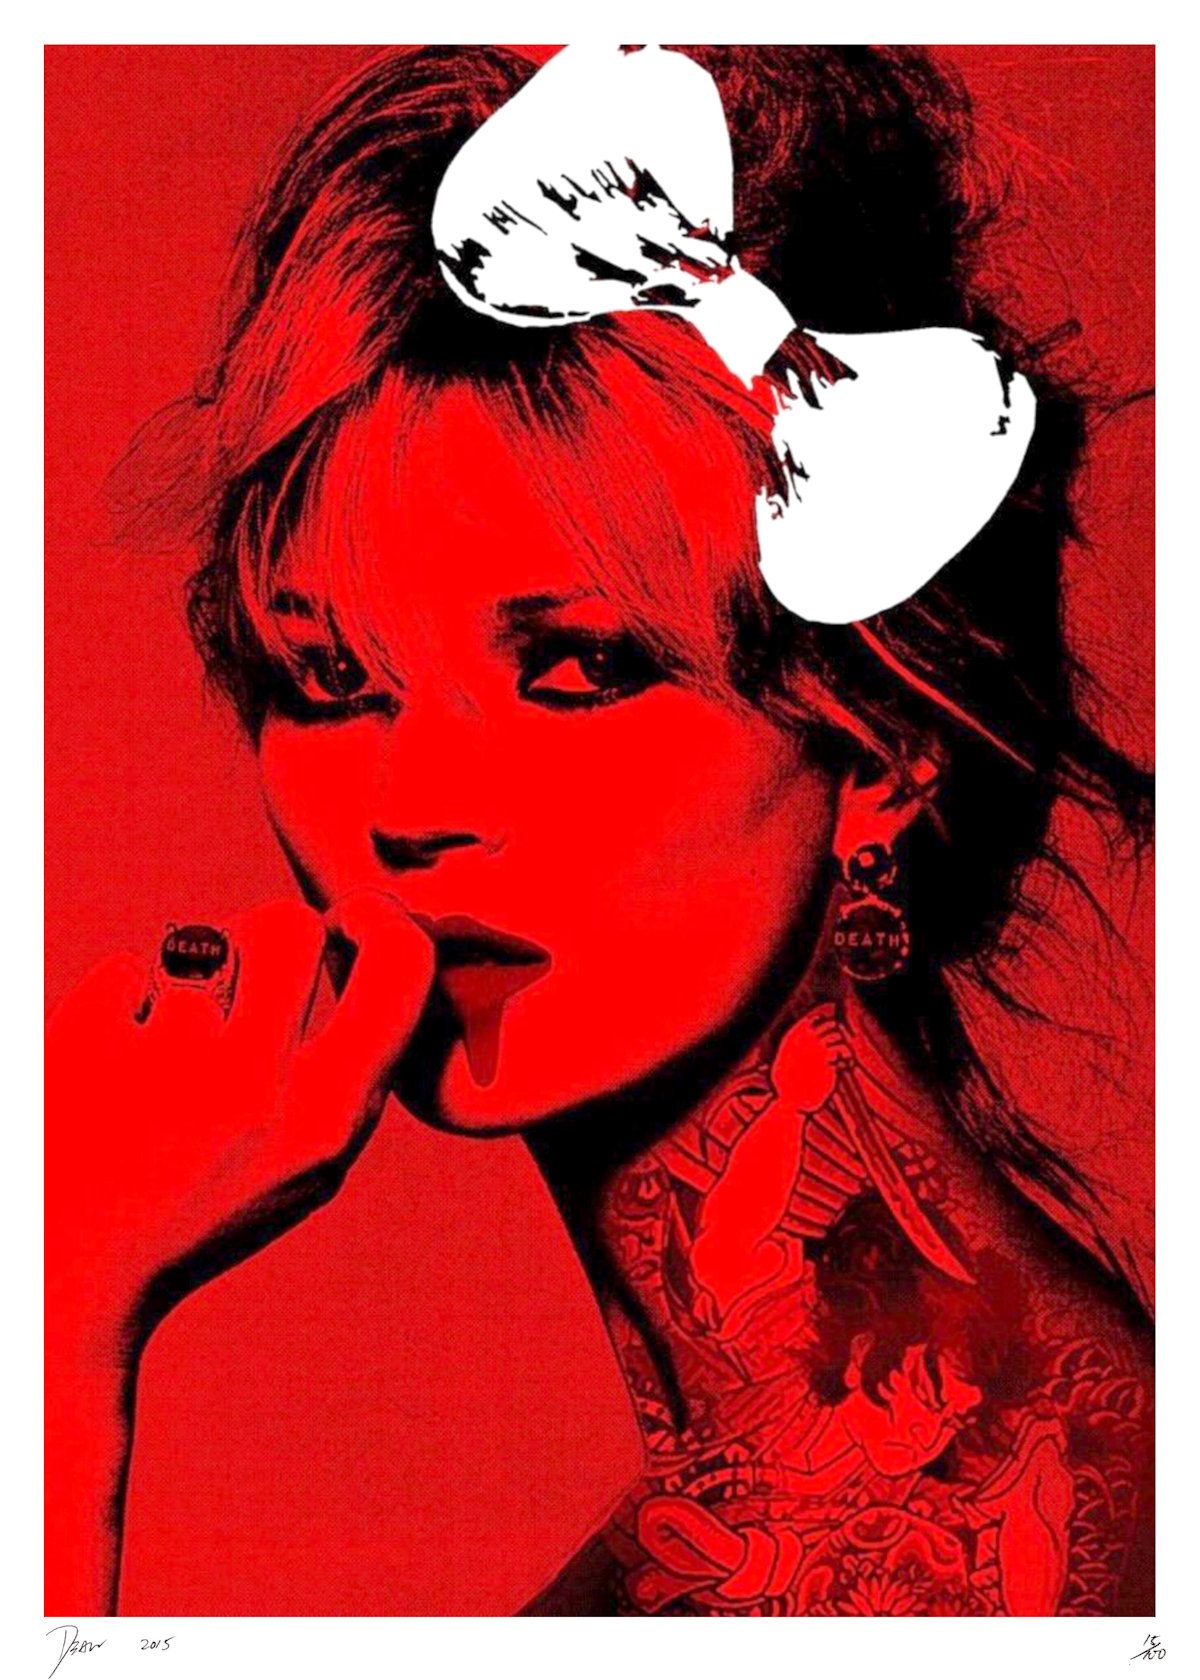 Death NYC Death NYC

Kate Moss tattoo Red, 2015

Screenprint

Limited edition of&hellip;